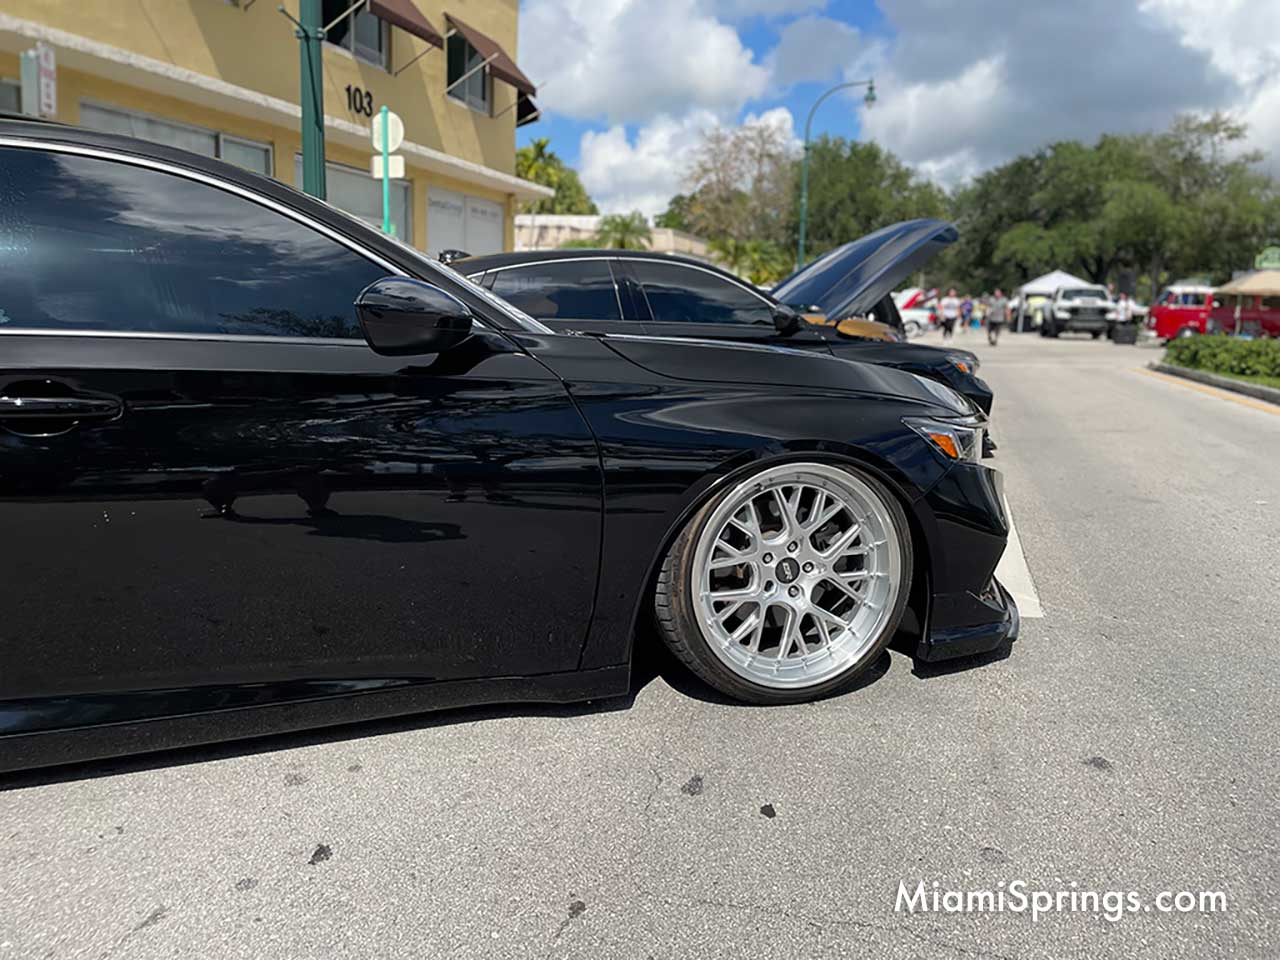 Westward Drive Car Show at the 2023 River Cities Festival in Miami Springs